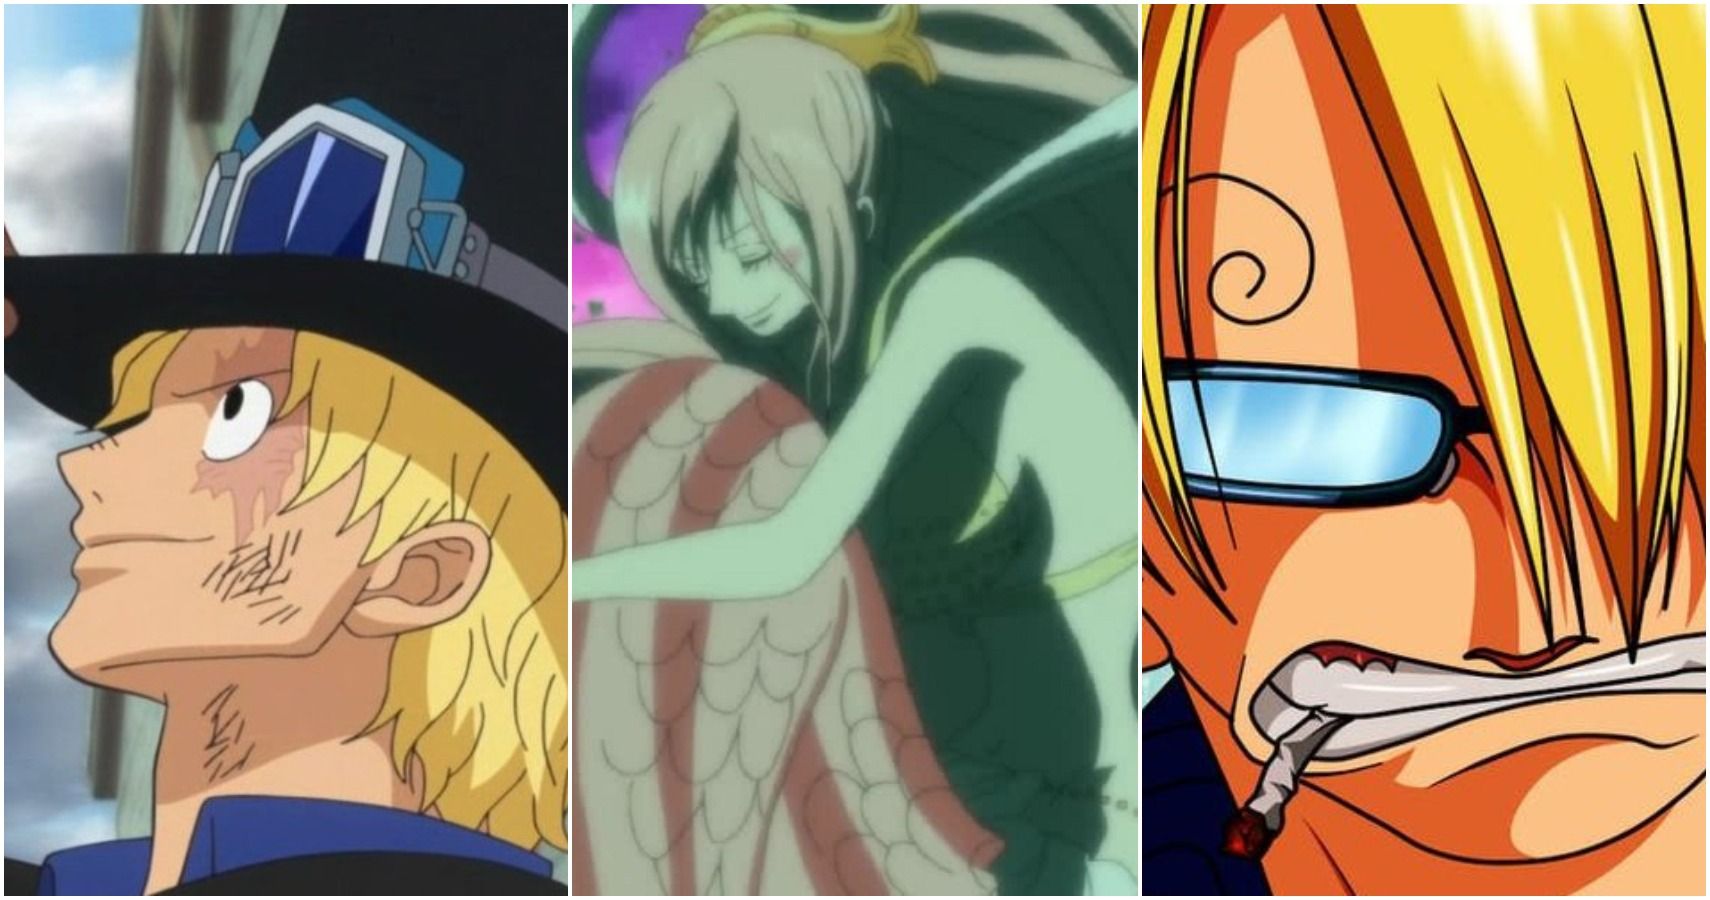 Which characters in One Piece do you believe will end up with each